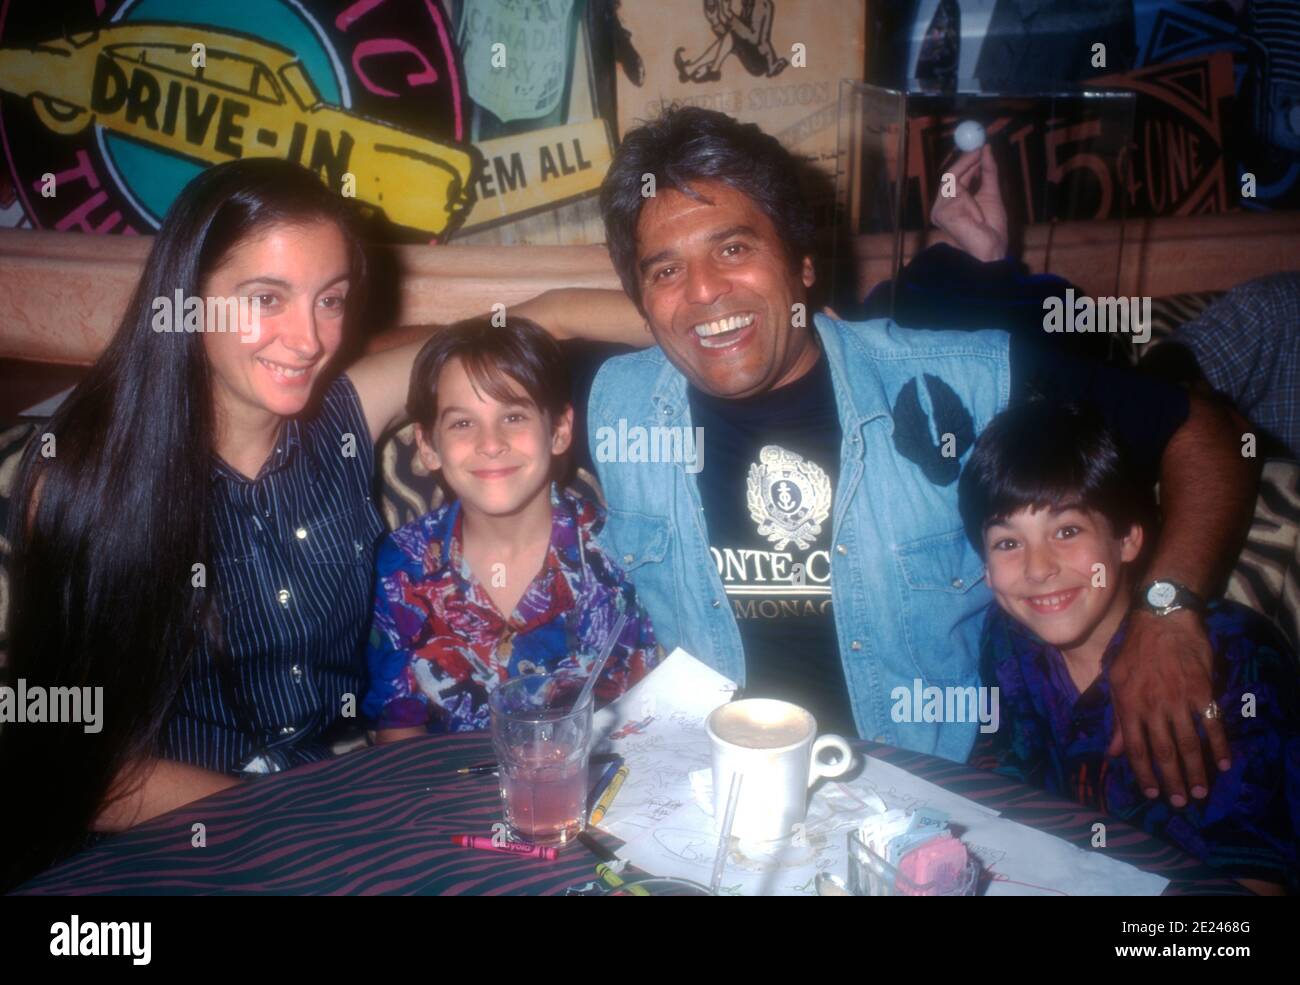 Beverly Hills, California, USA 1st May 1996 Actor Erik Estrada, wife Nanete Mirkovic and sons Anthony Eric Estrada and Brandon Michael-Paul Estrada attend Malibu Shores Event at Planet Hollywood Beverly Hills on May 1, 1996 in Beverly Hills, California, USA. Photo by Barry King/Alamy Stock Photo Stock Photo